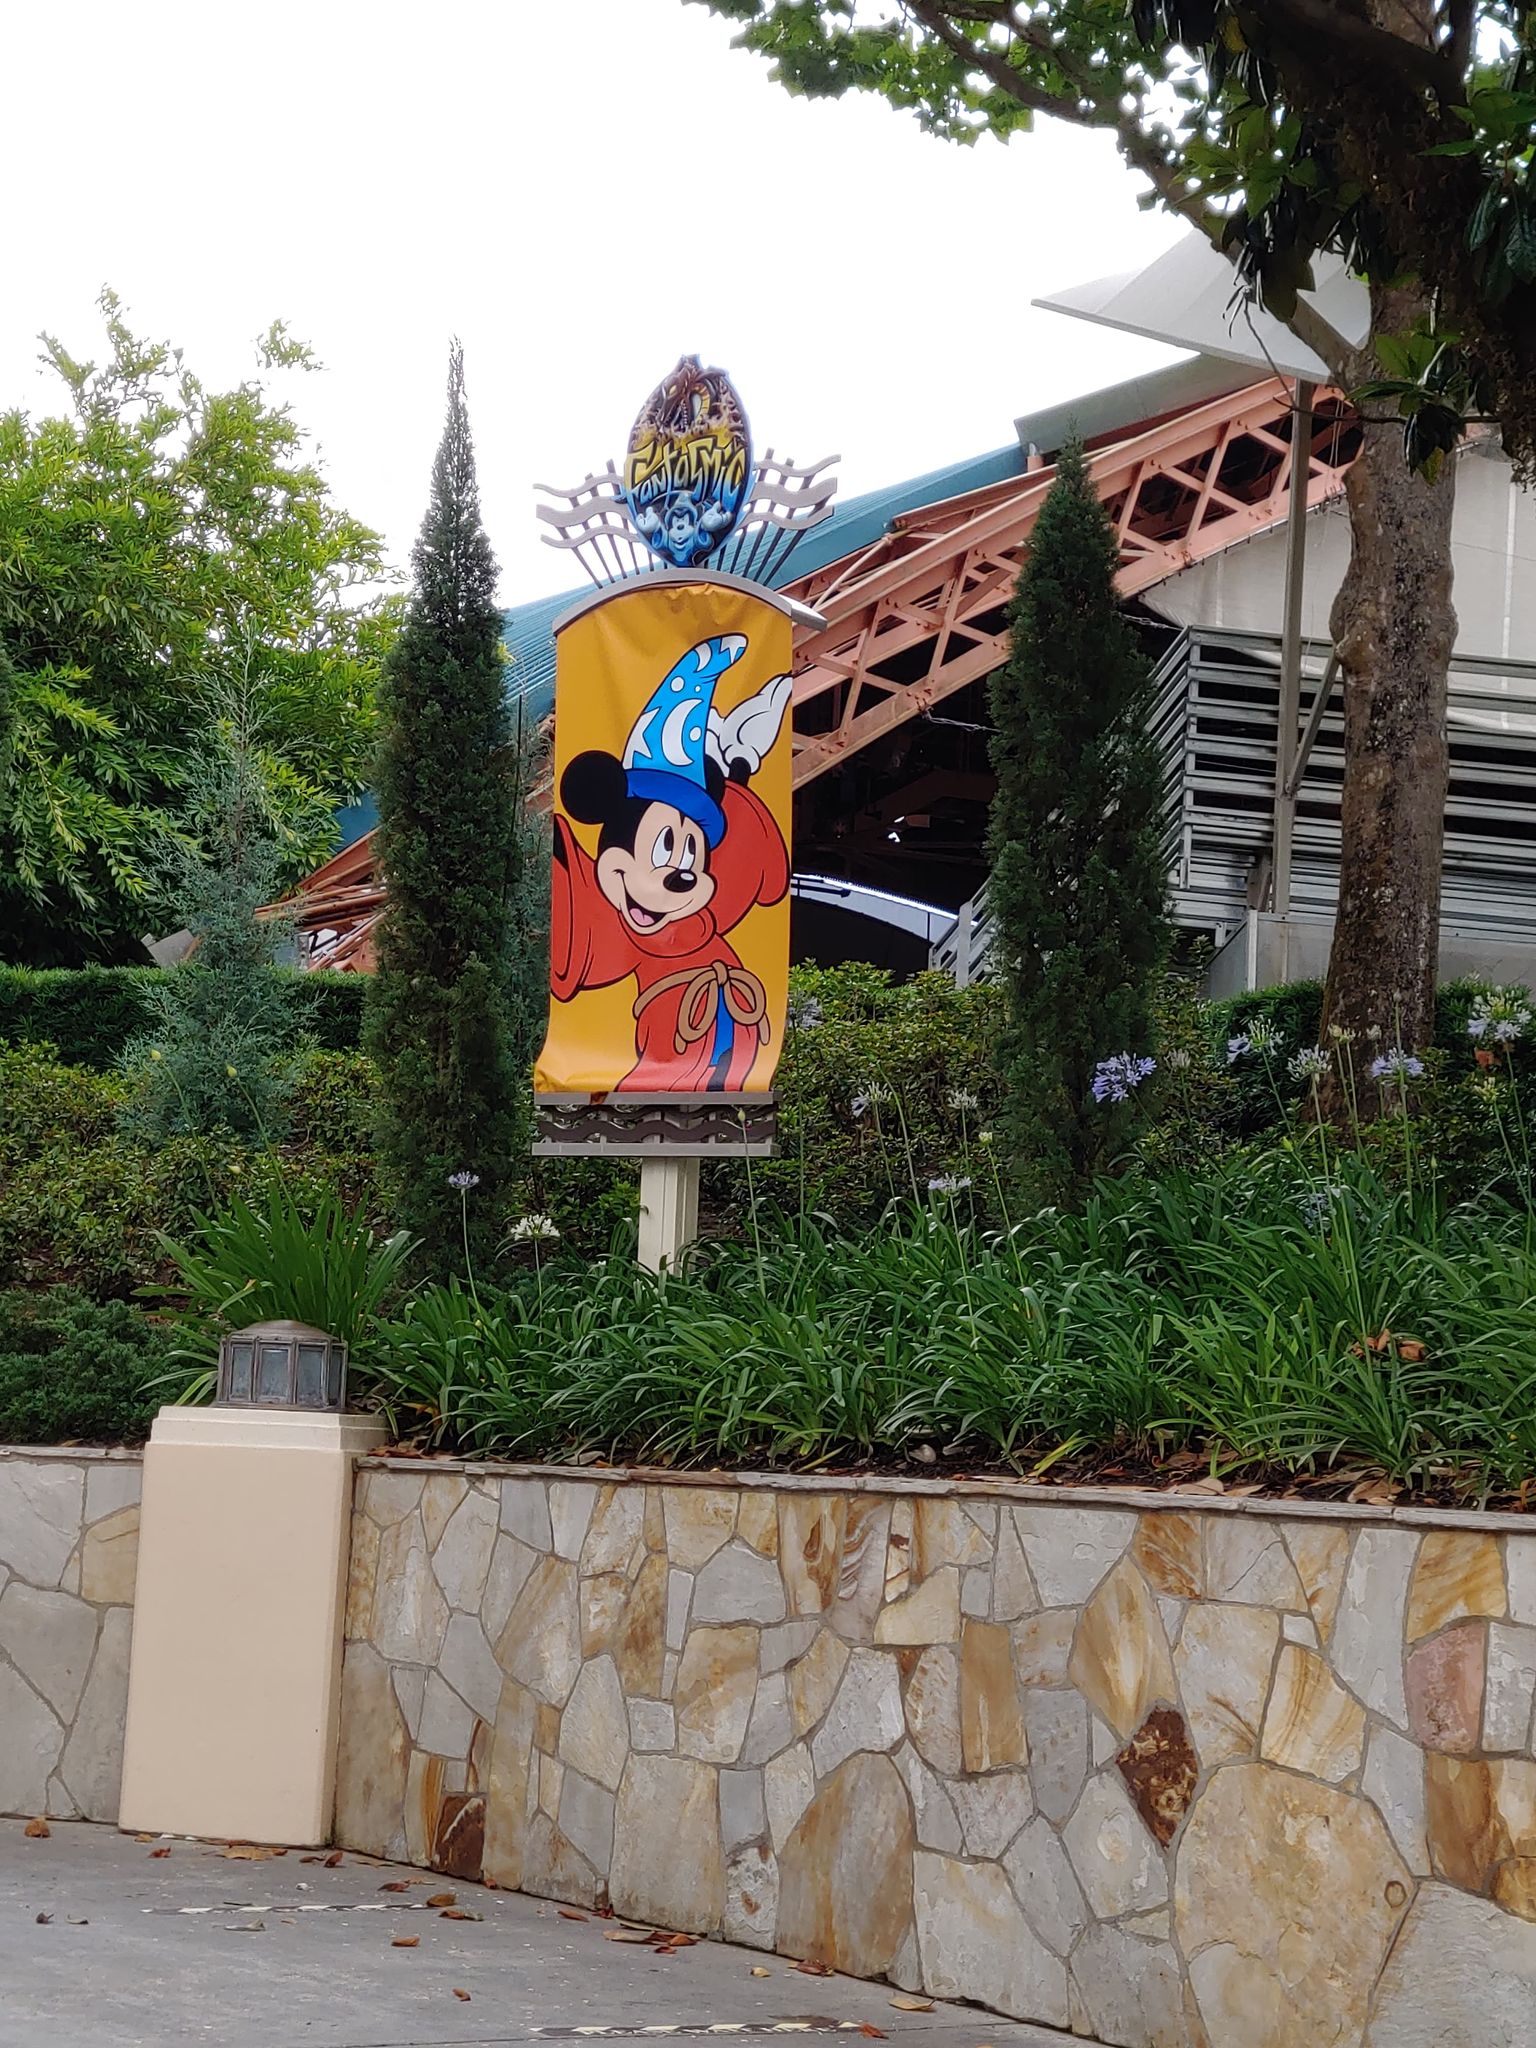 New Fantasmic Banners Up in Hollywood Studios